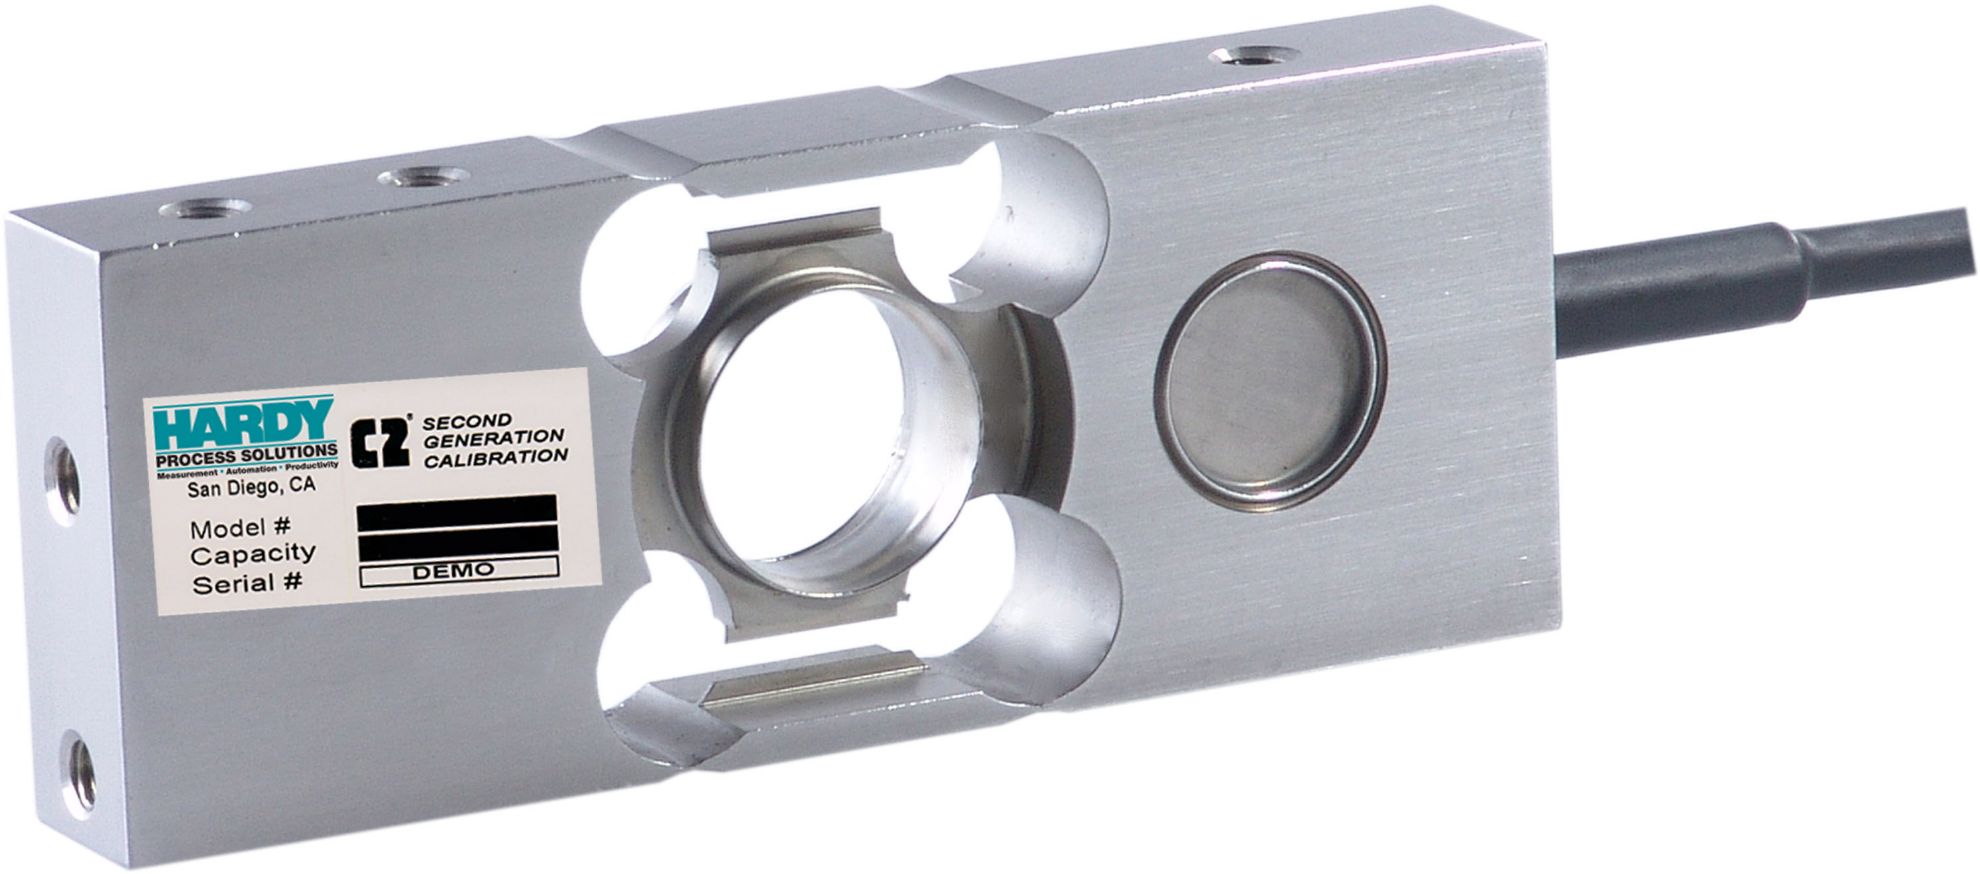 SPH03C - C2® Hermetic Stainless Steel Single Point Load Cell (6 kg - 60 kg)